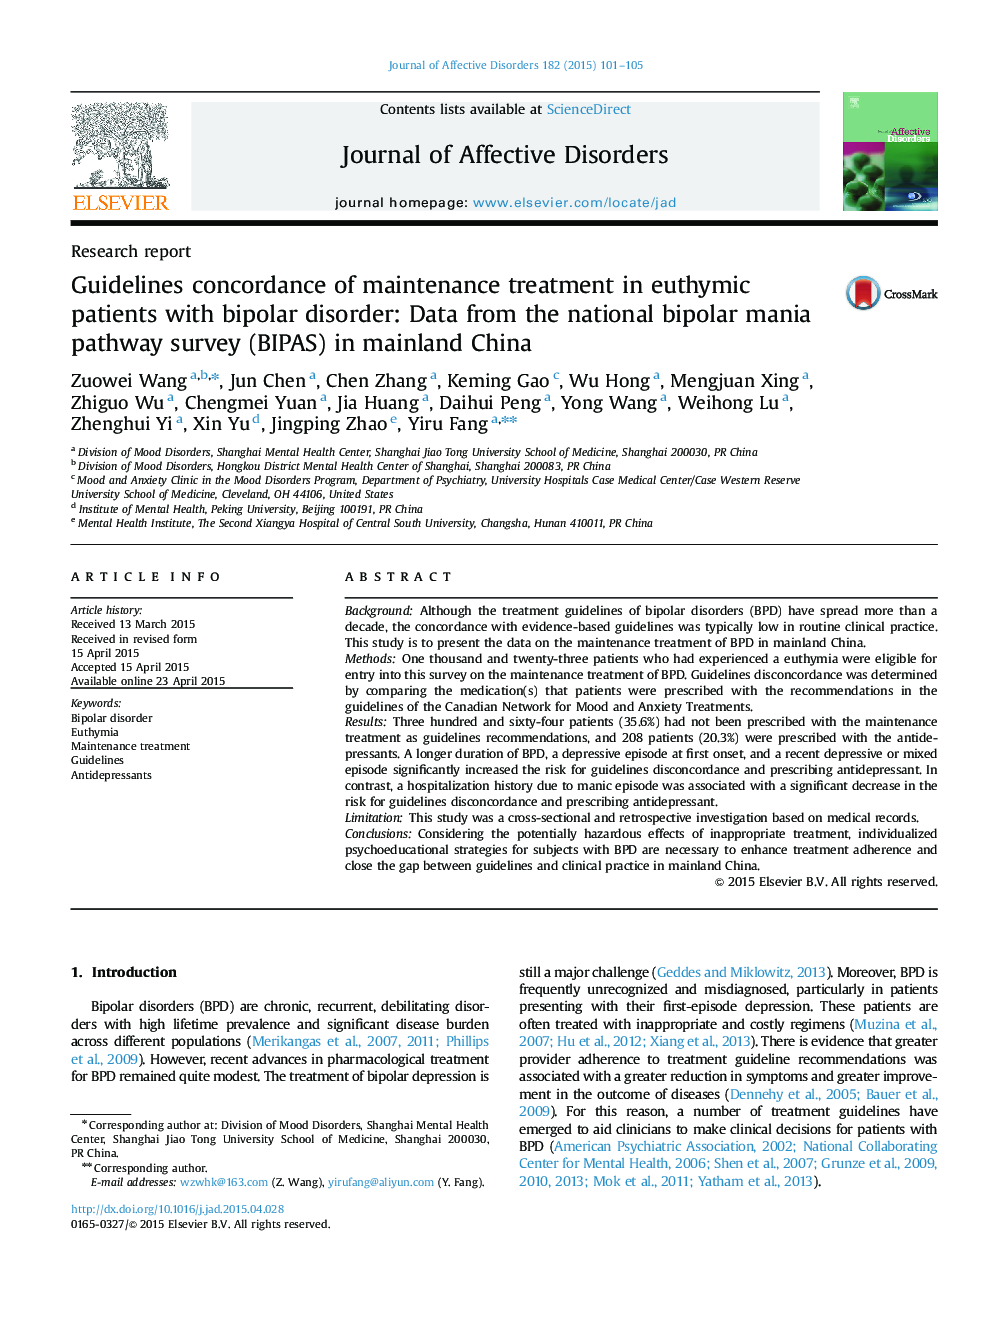 Guidelines concordance of maintenance treatment in euthymic patients with bipolar disorder: Data from the national bipolar mania pathway survey (BIPAS) in mainland China